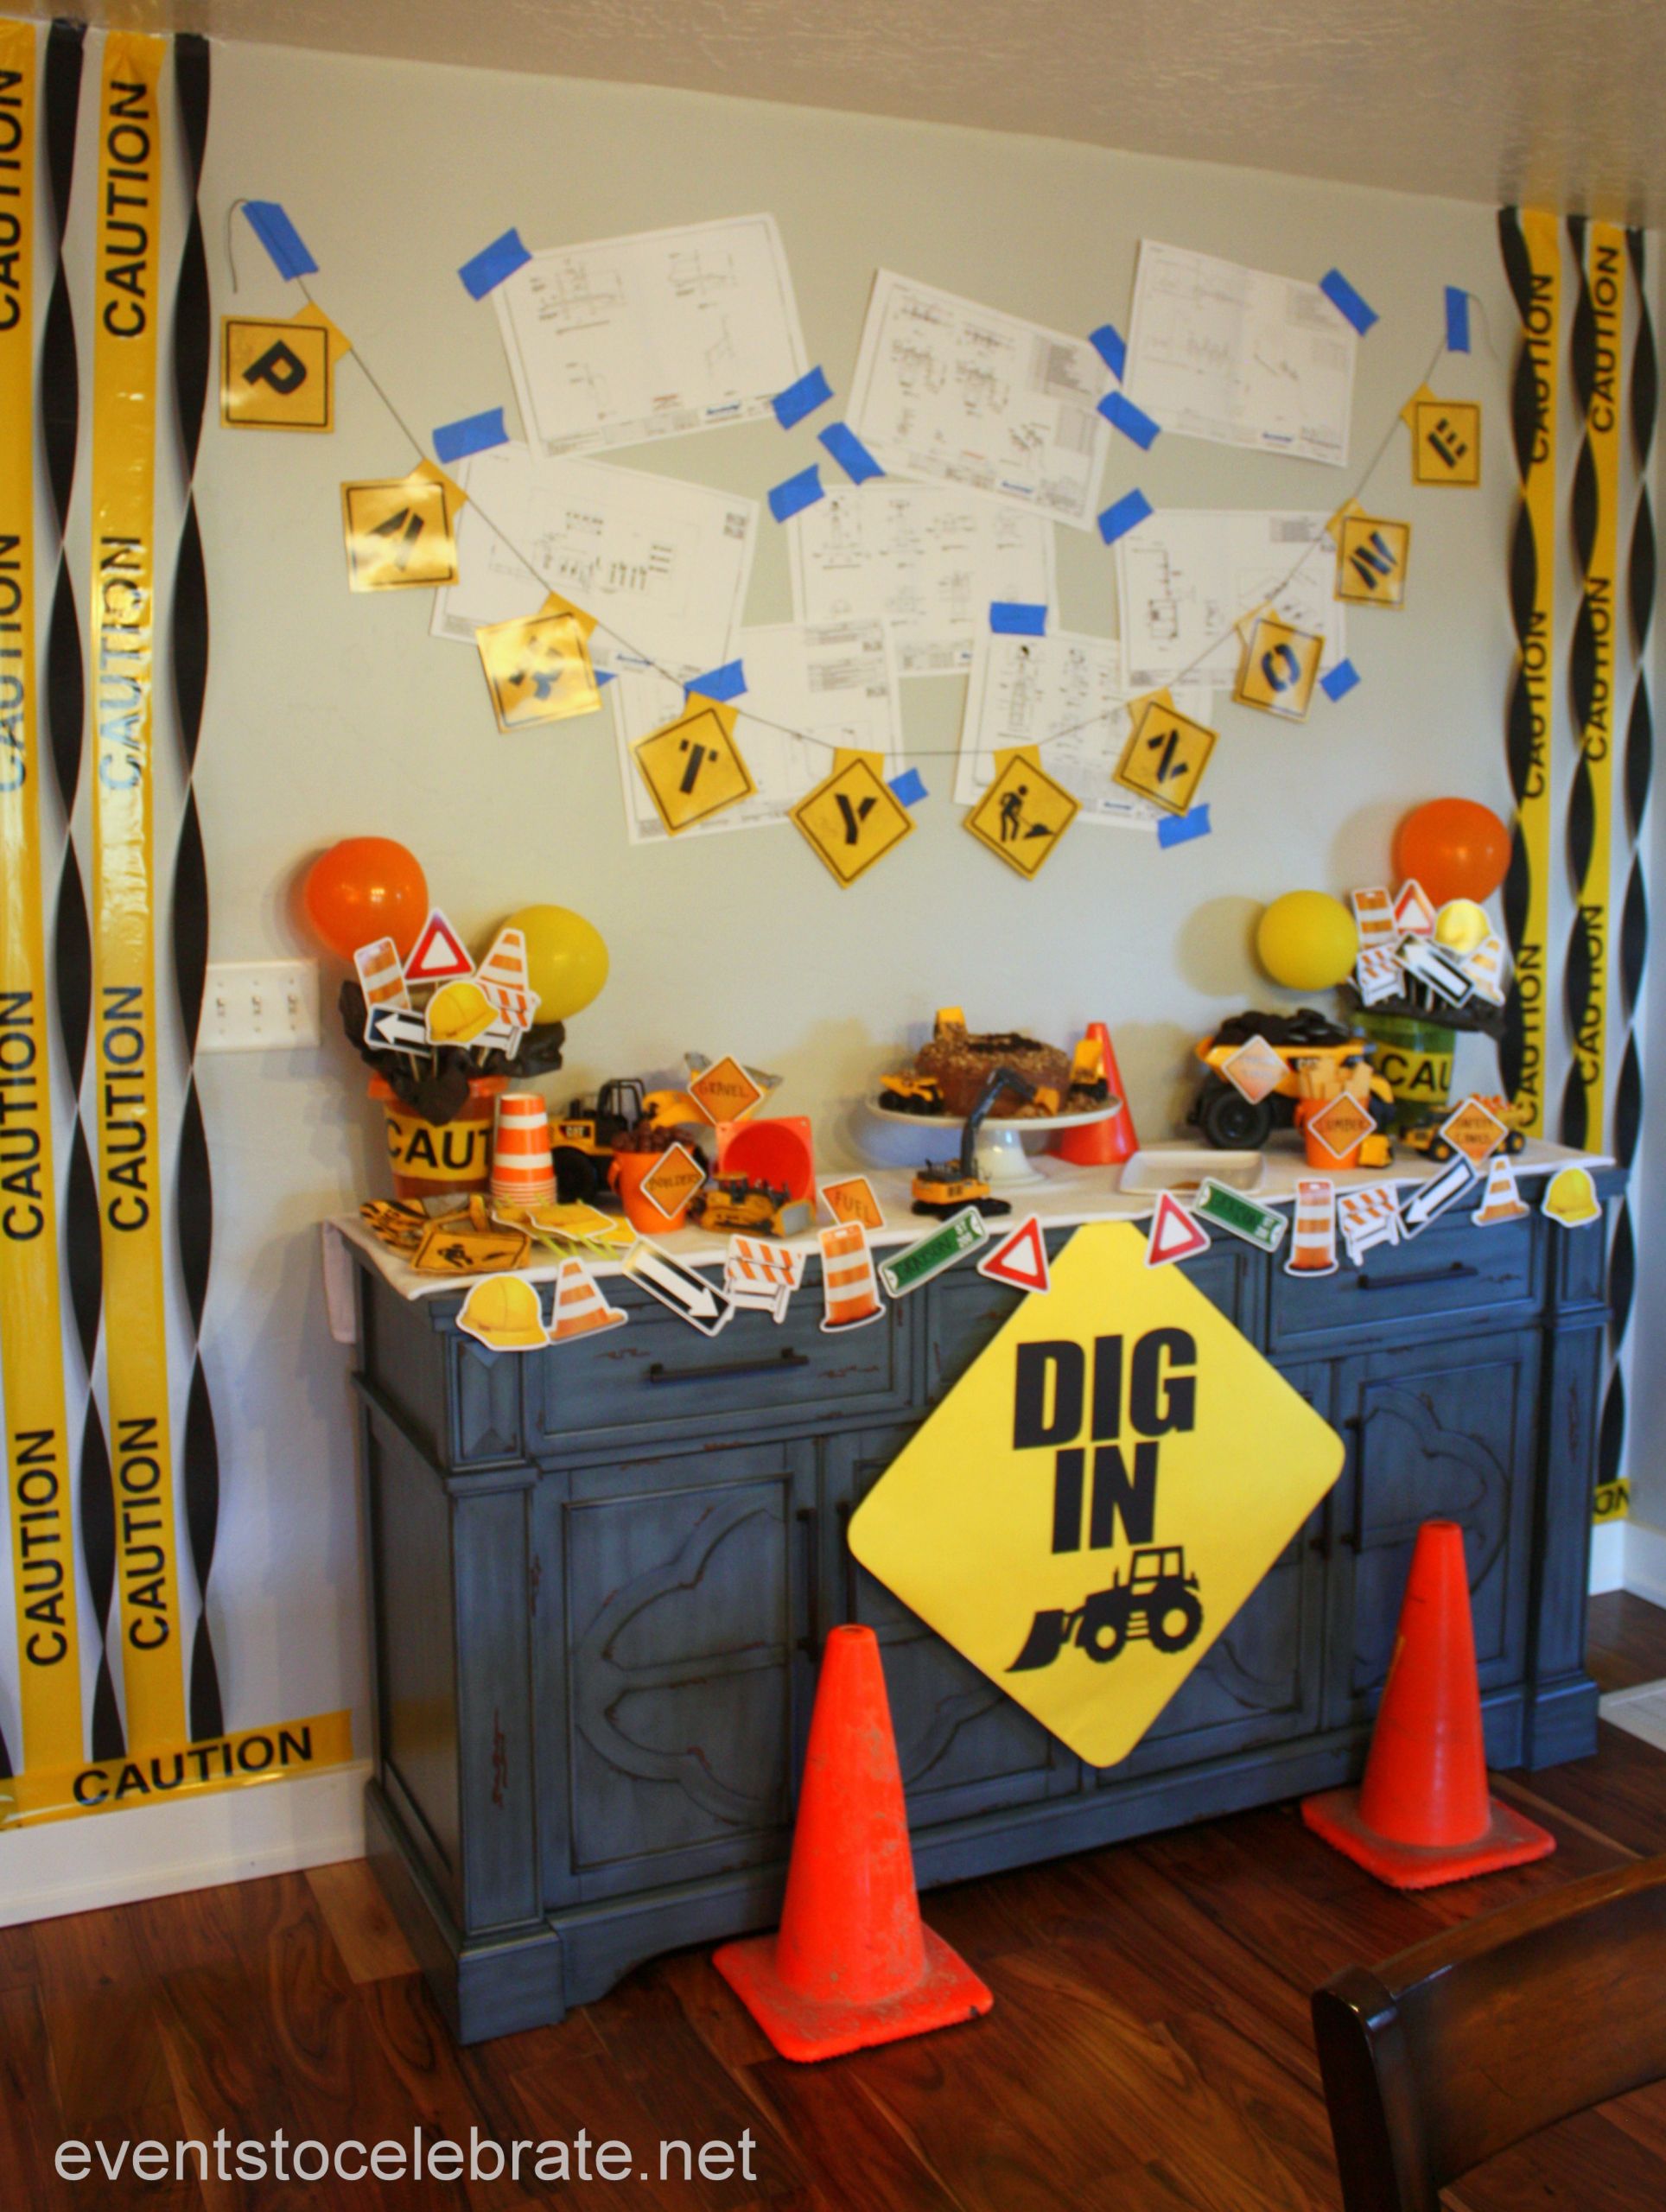 Construction Birthday Party Decorations
 Construction Birthday Party Ideas events to CELEBRATE